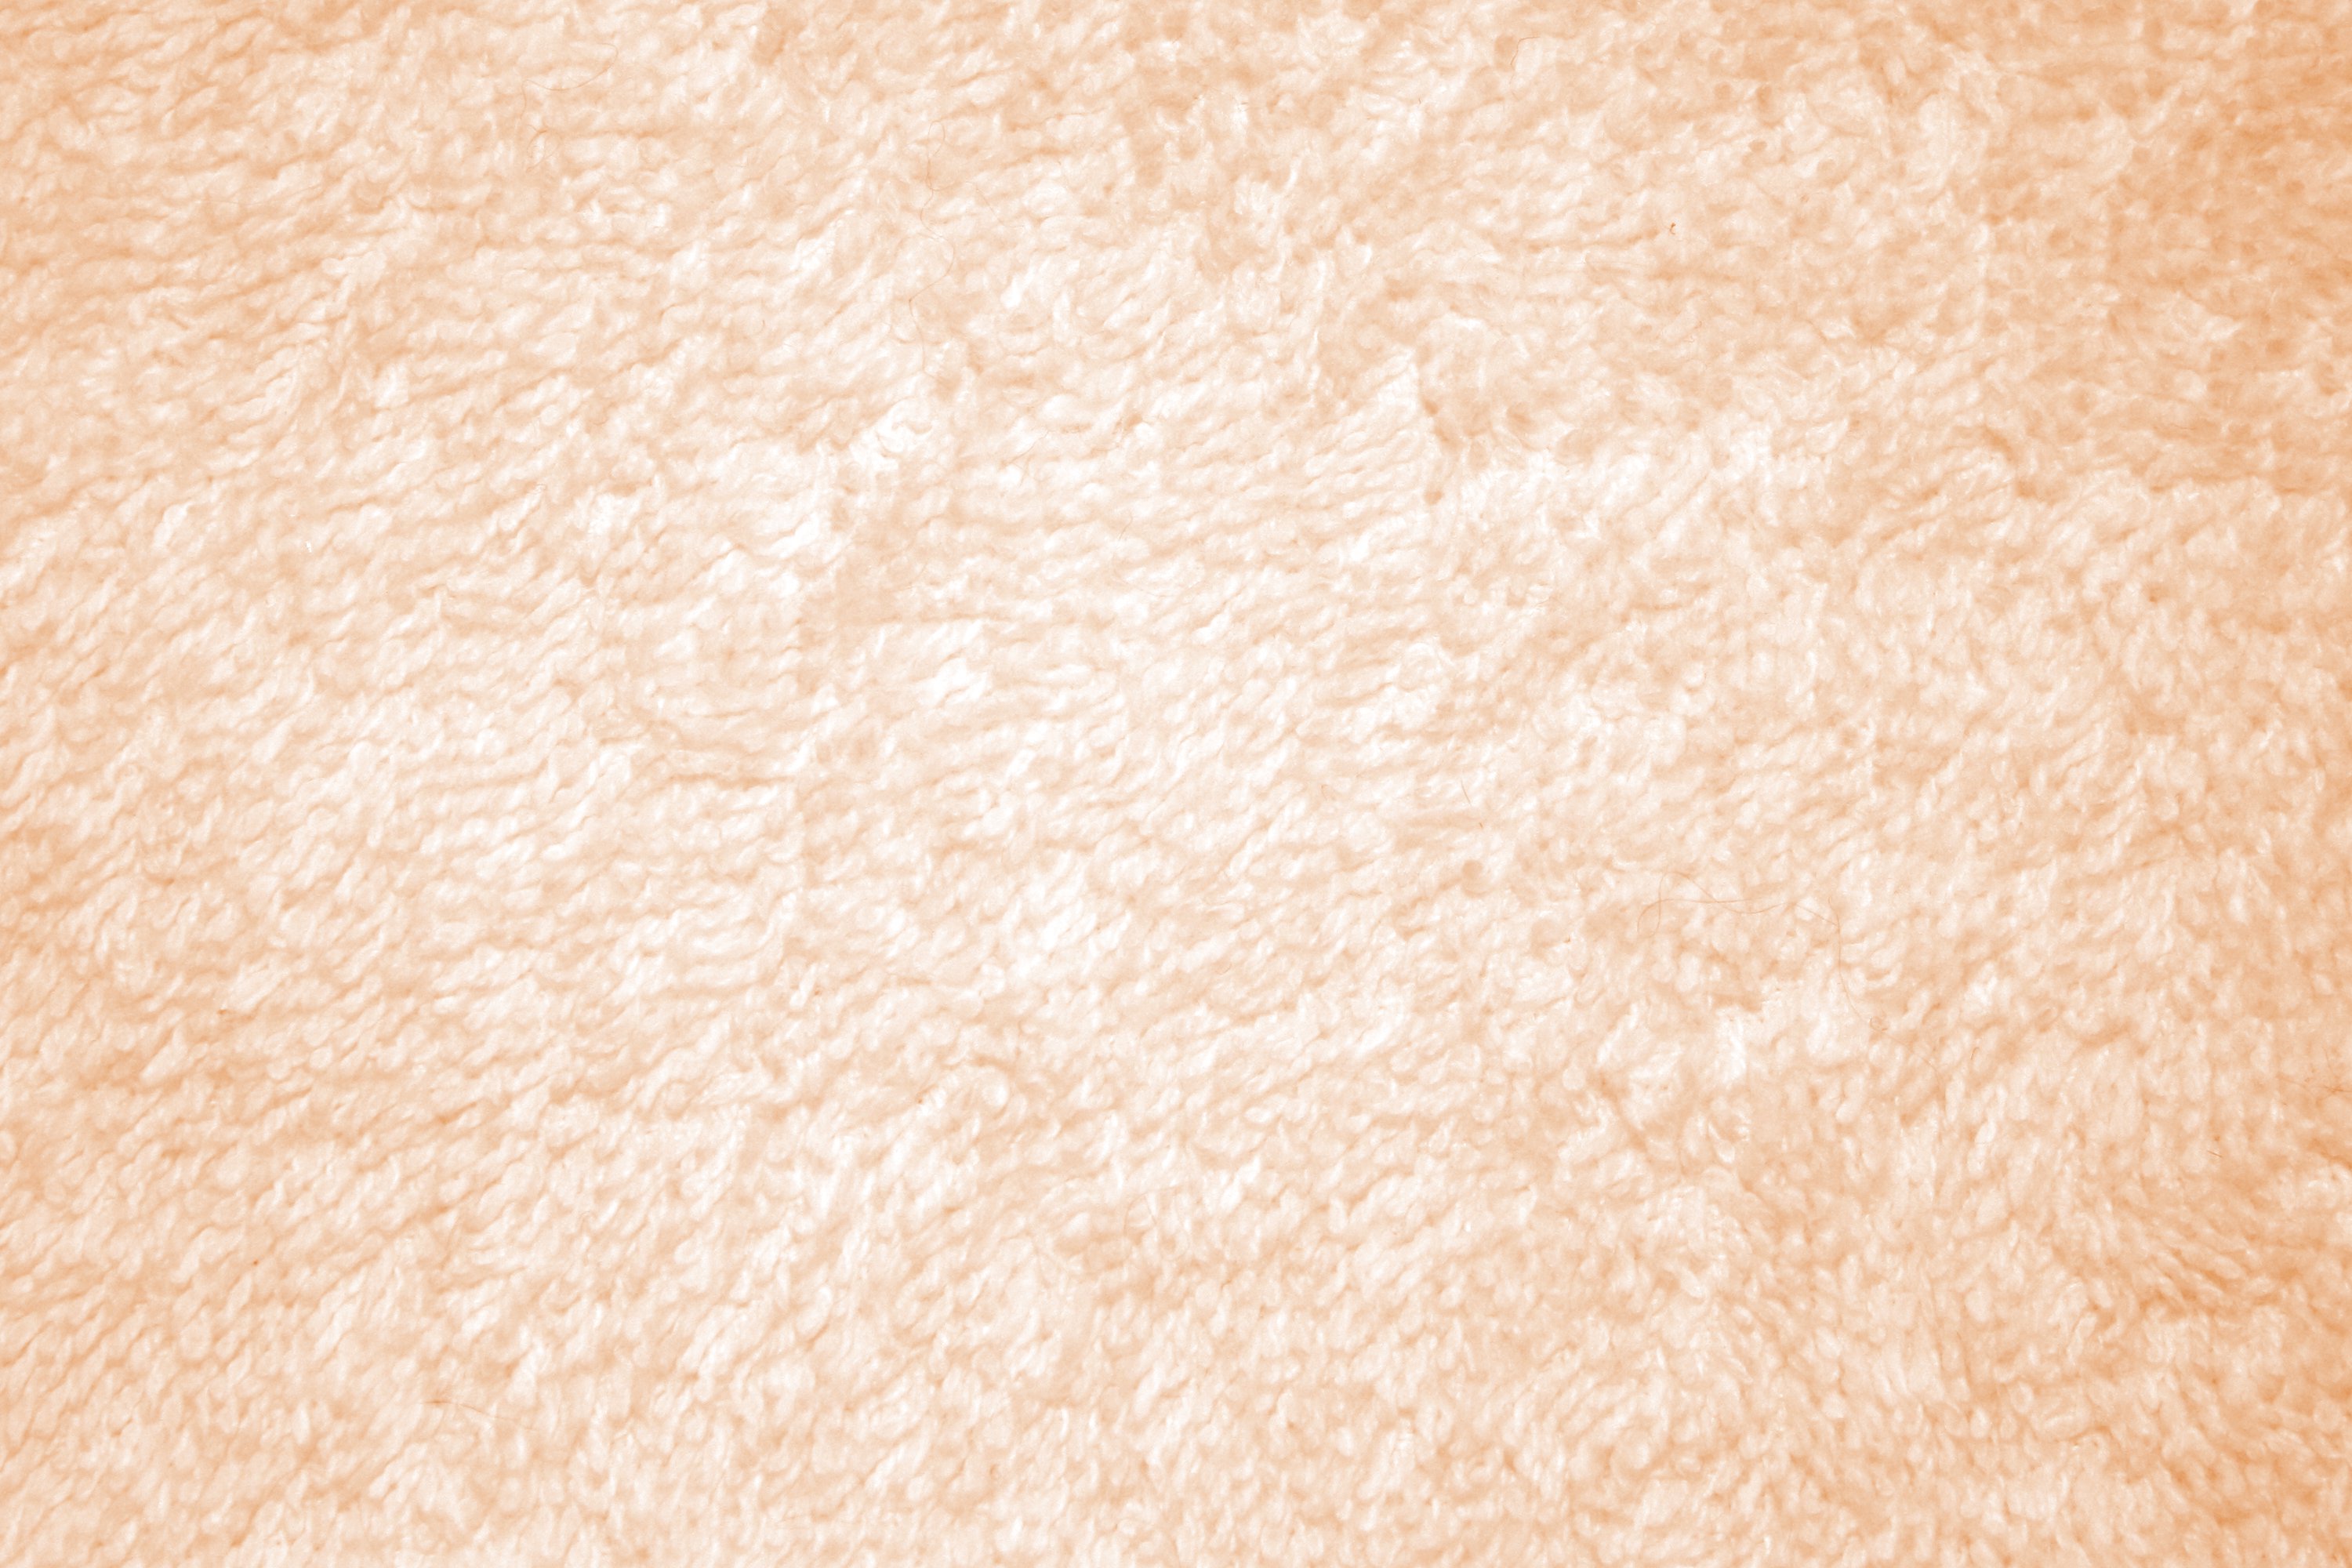 Peach Colored Terry Cloth Texture Picture Photograph Photos